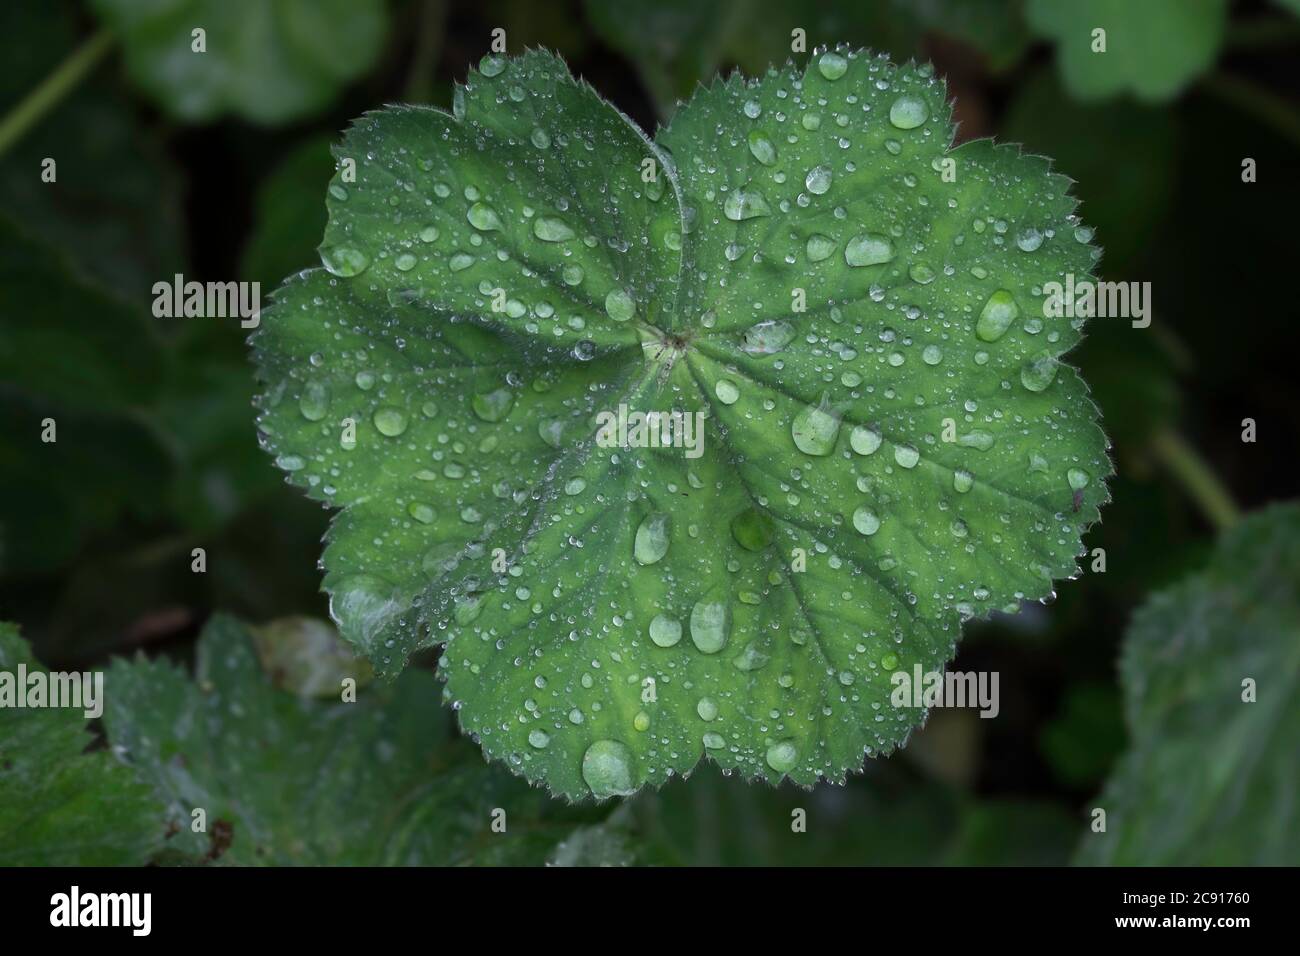 Alchemilla vulgaris or common lady's mantle. Leaf covered with droplets of dew Stock Photo